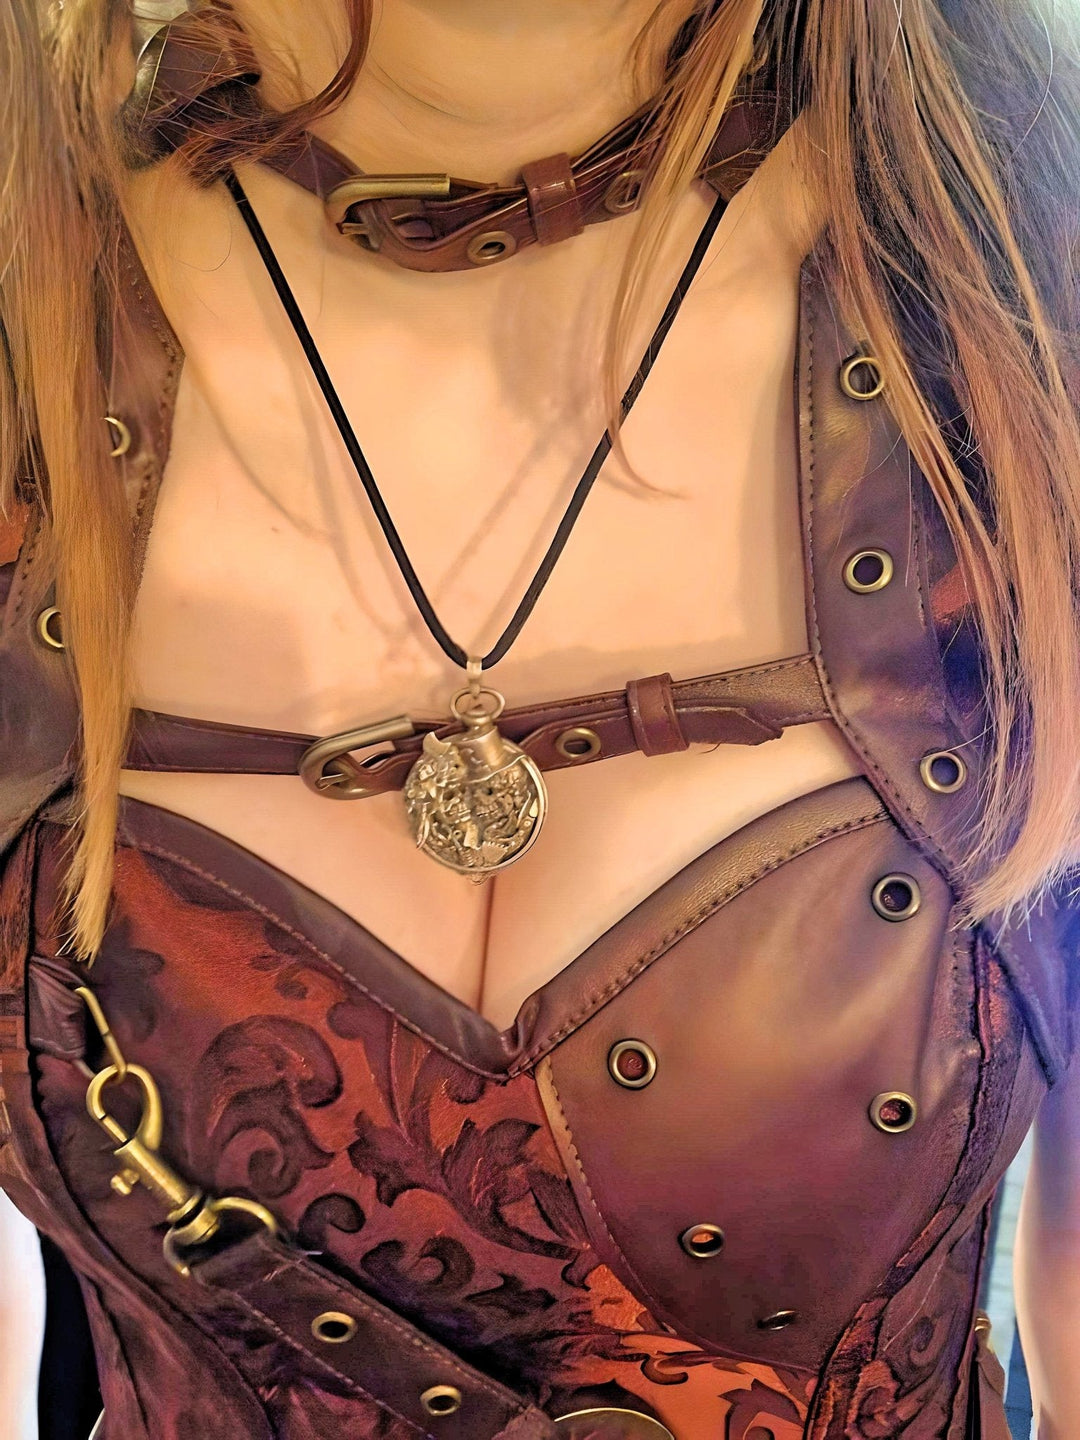 Steampunk - All Natural Arts - Girl wearing steampunk outfit with Imortal Love necklace